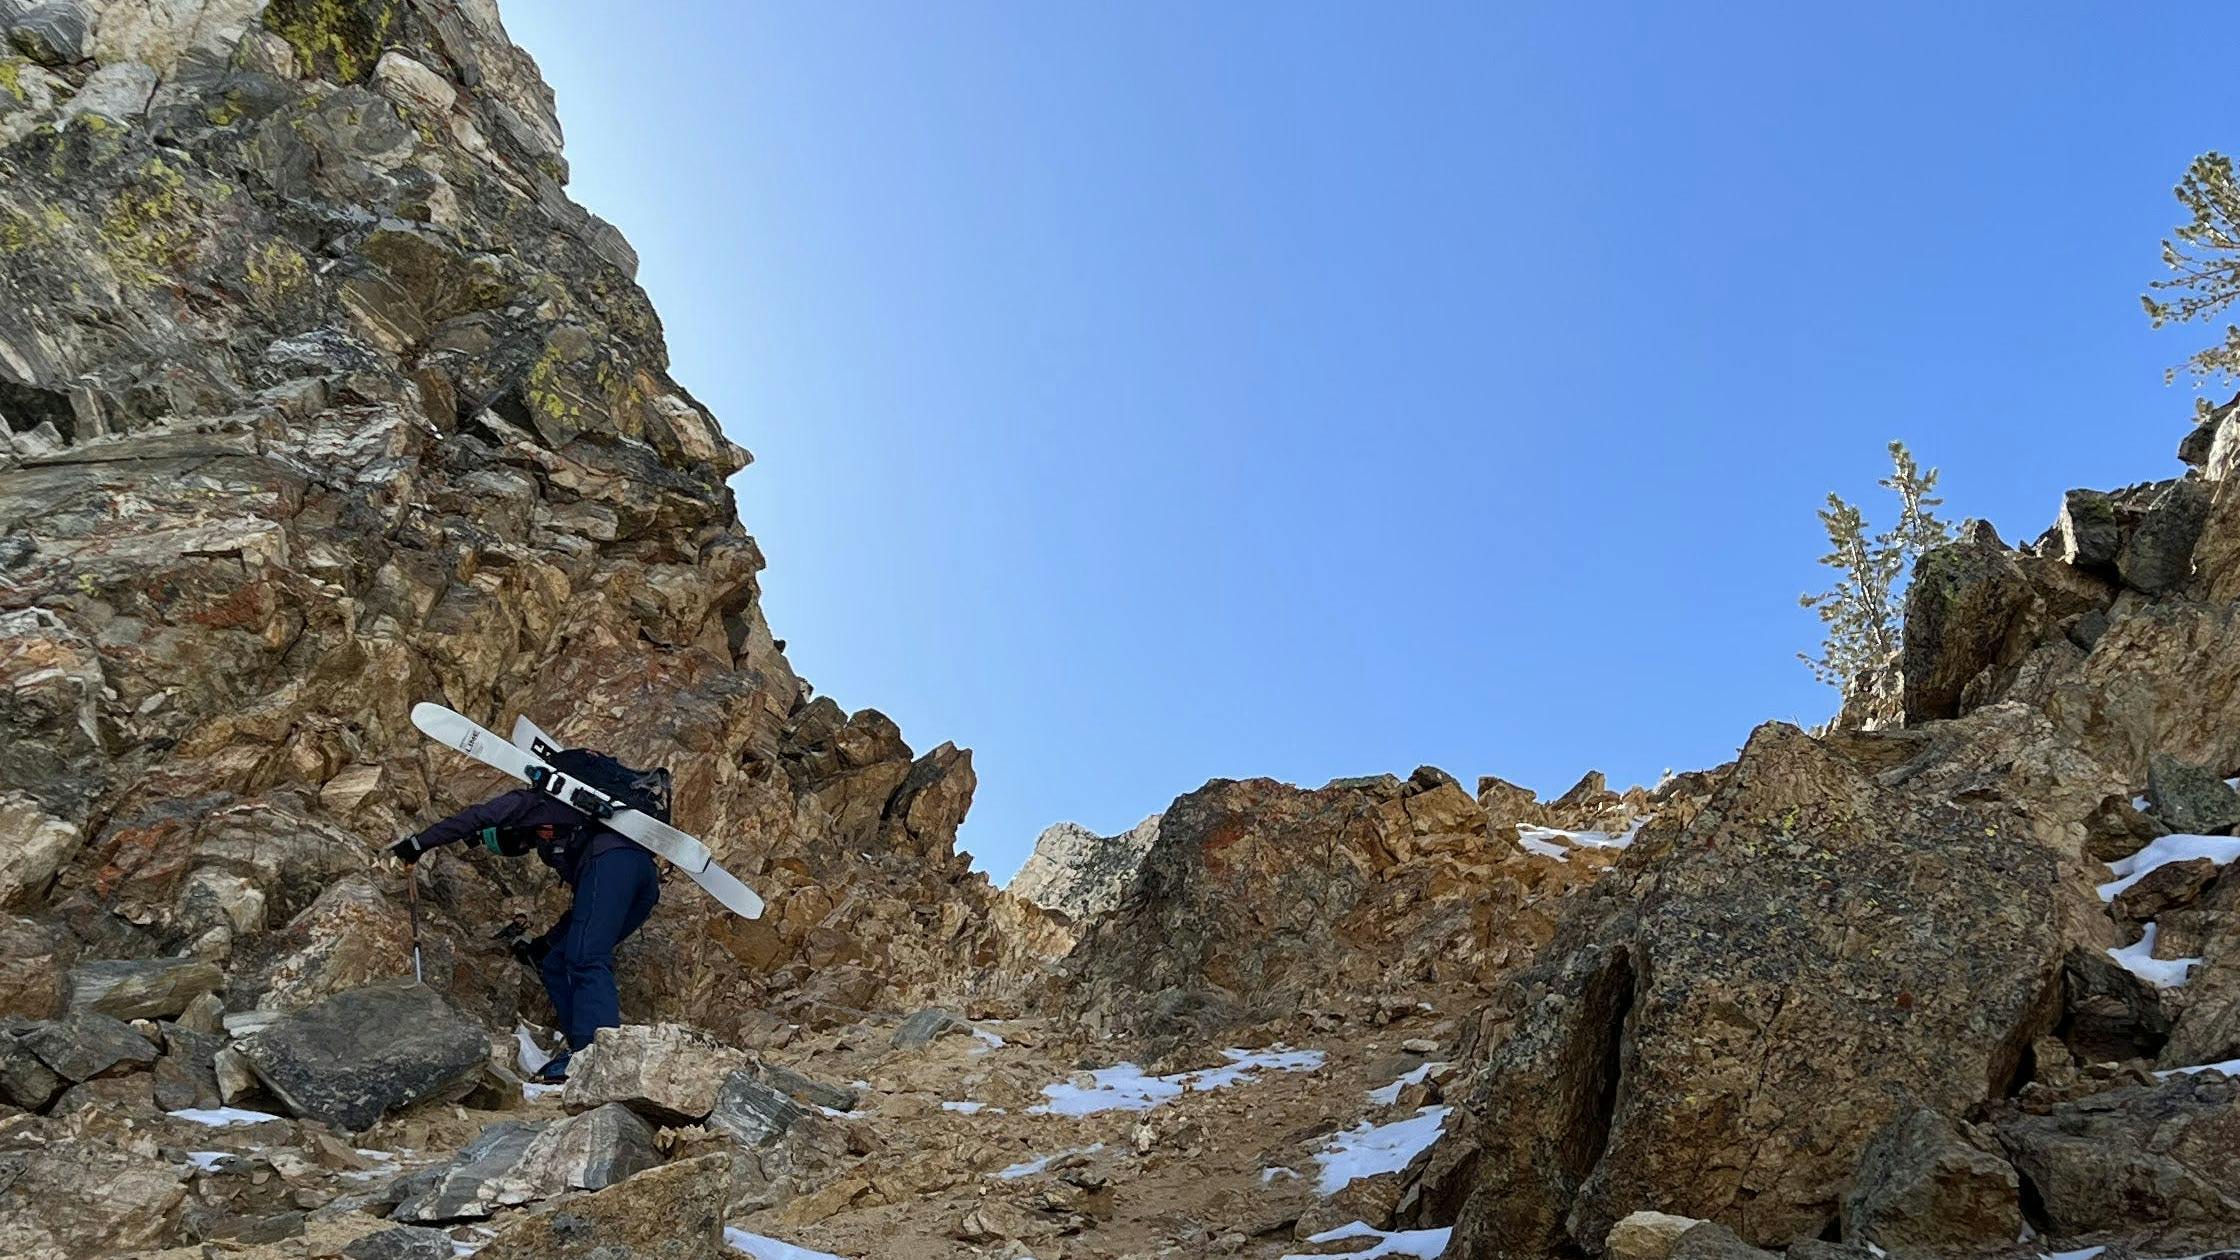 A woman with skis is climbing down a rocky face. She has skis on her backpack. 